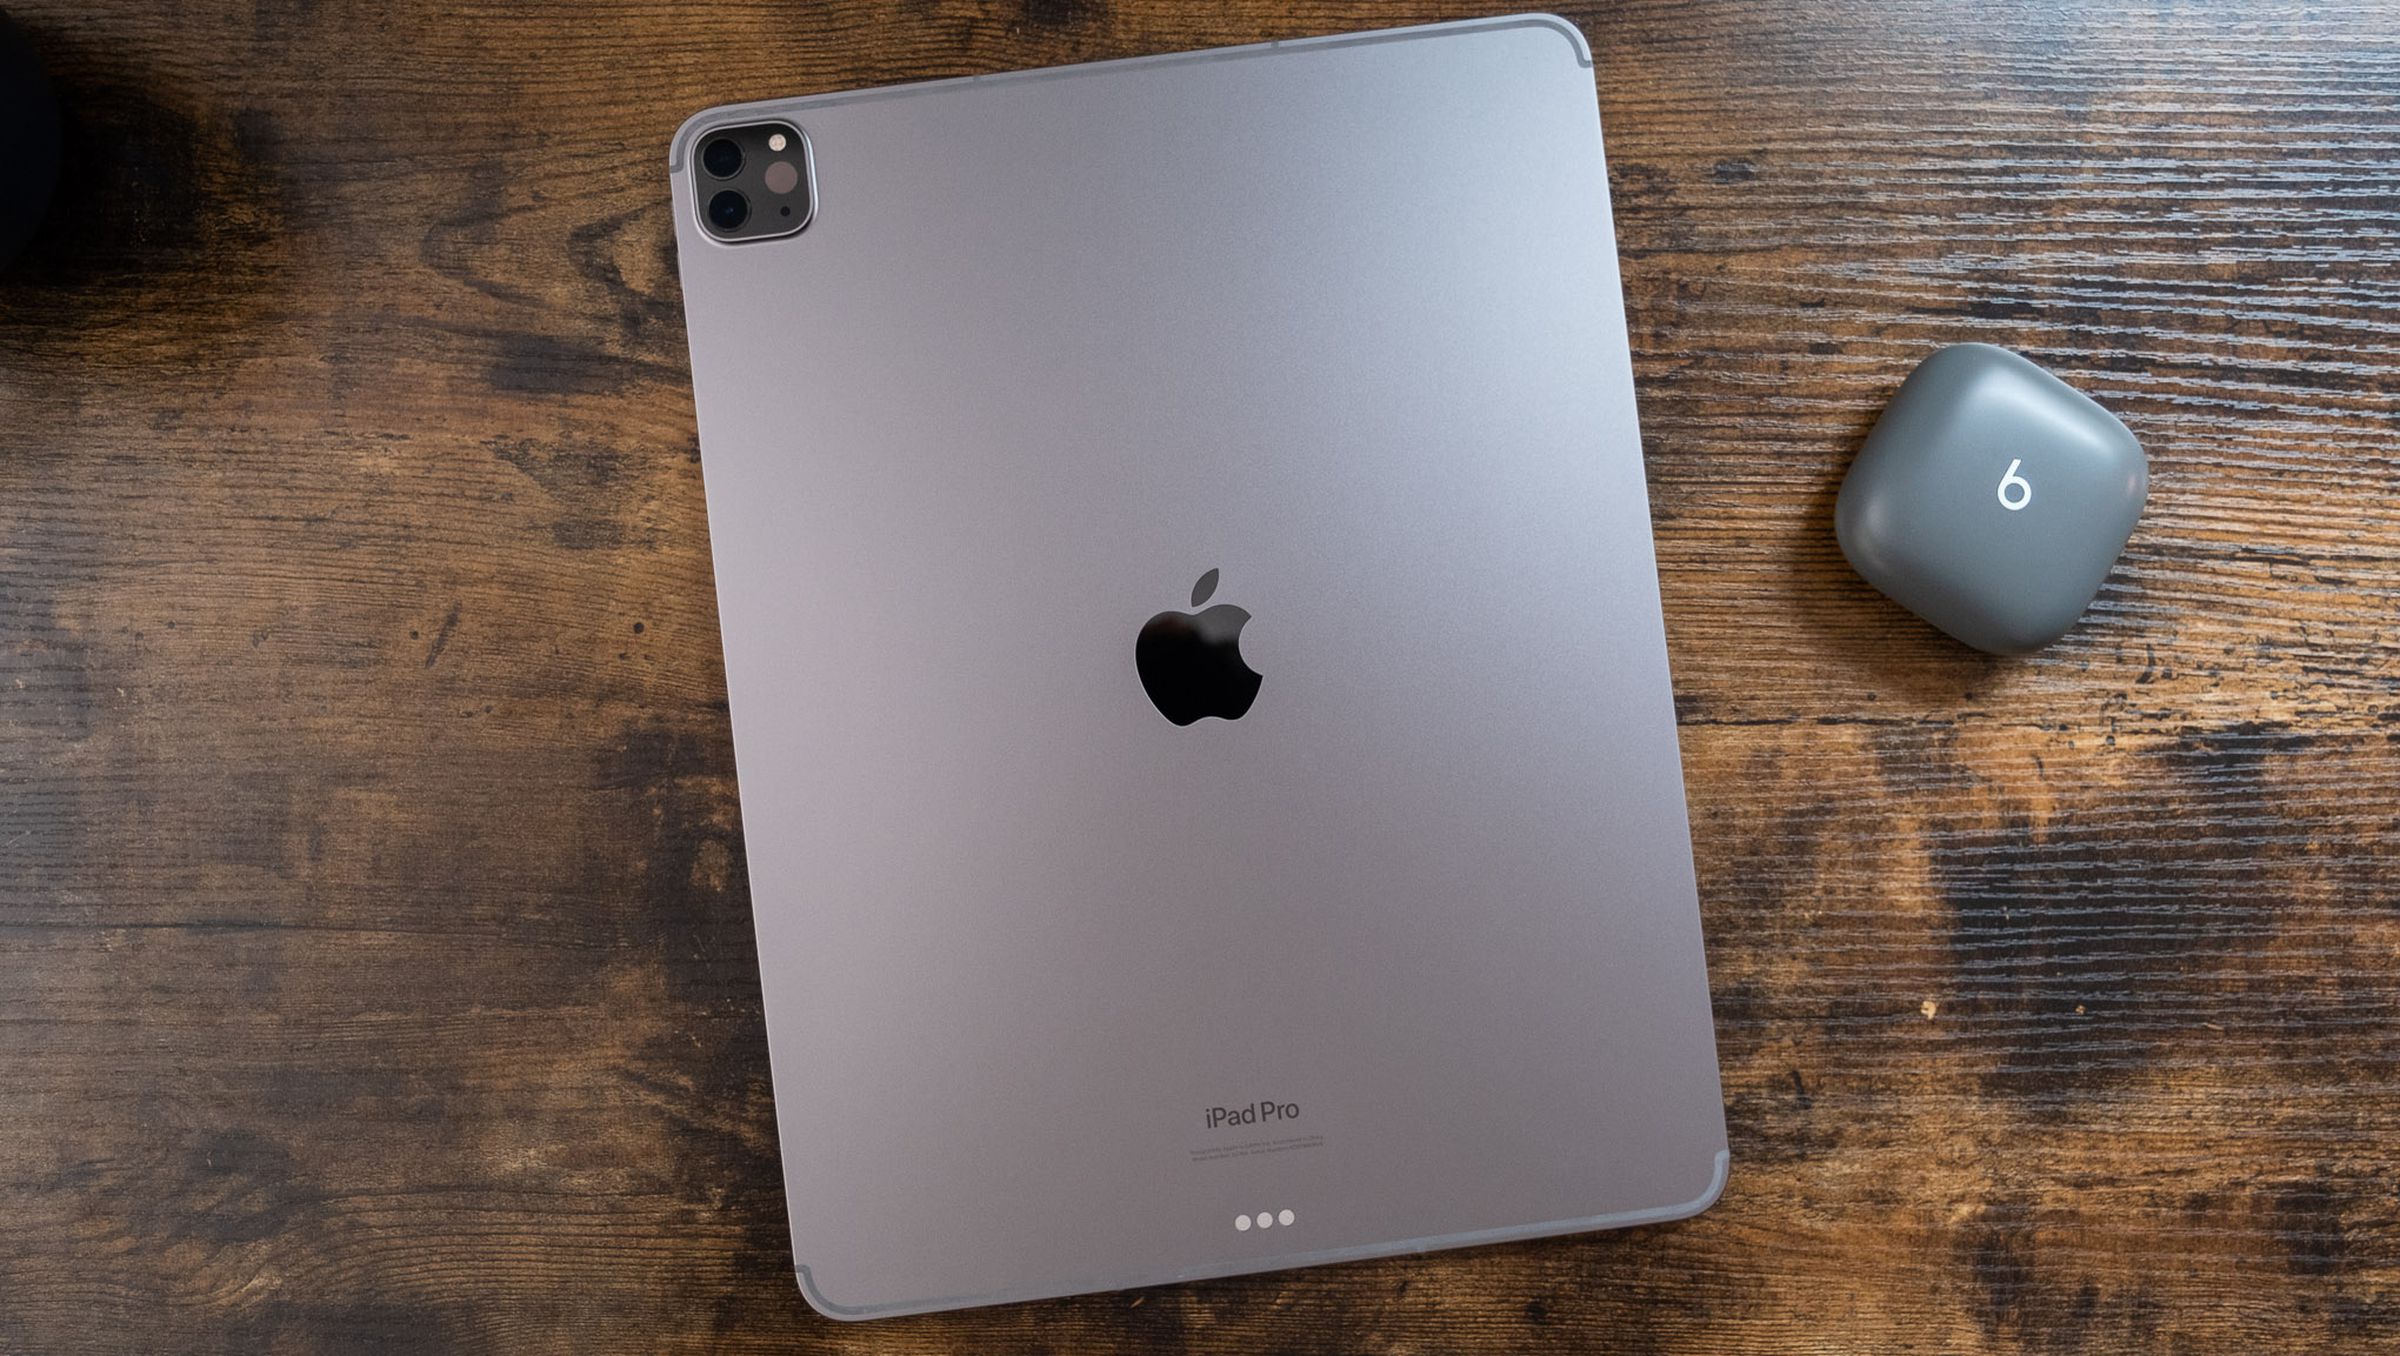 A 12.9-inch space gray iPad Pro face down on a wooden table, viewed from the top down.